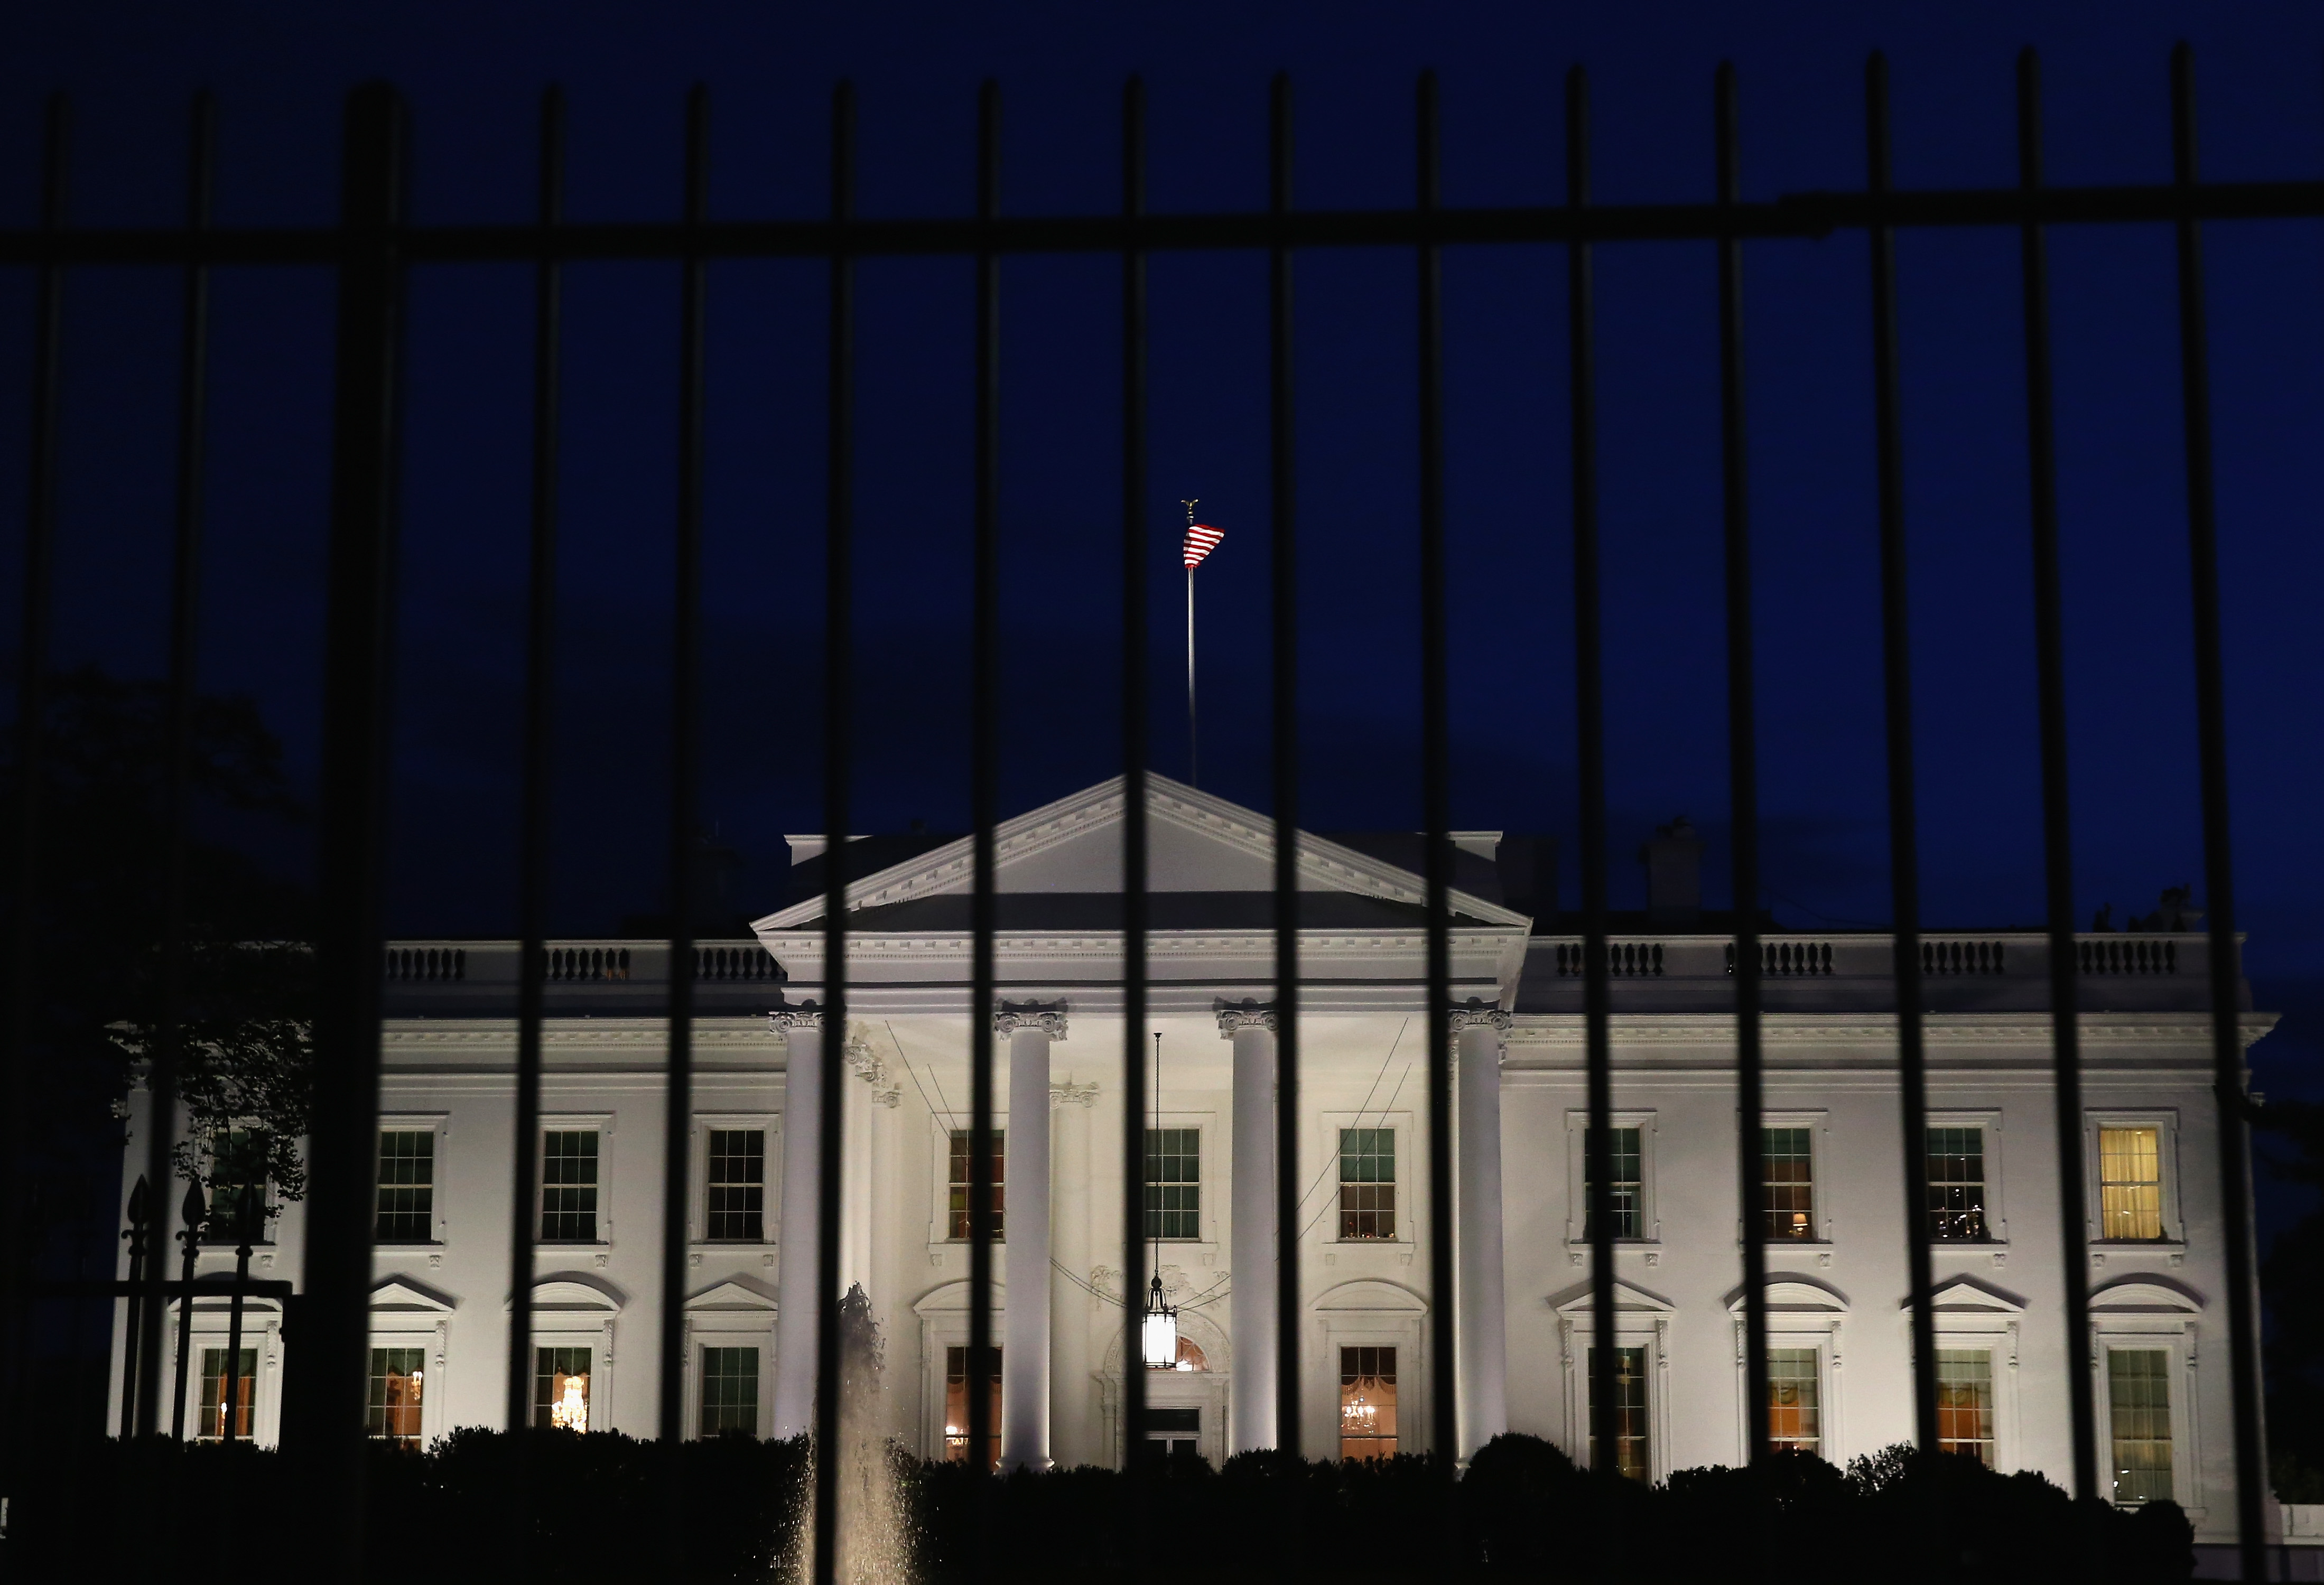 A tall security fence stands in front of the White House on Nov. 4, 2014, in Washington, D.C. (Mark Wilson—Getty Images)